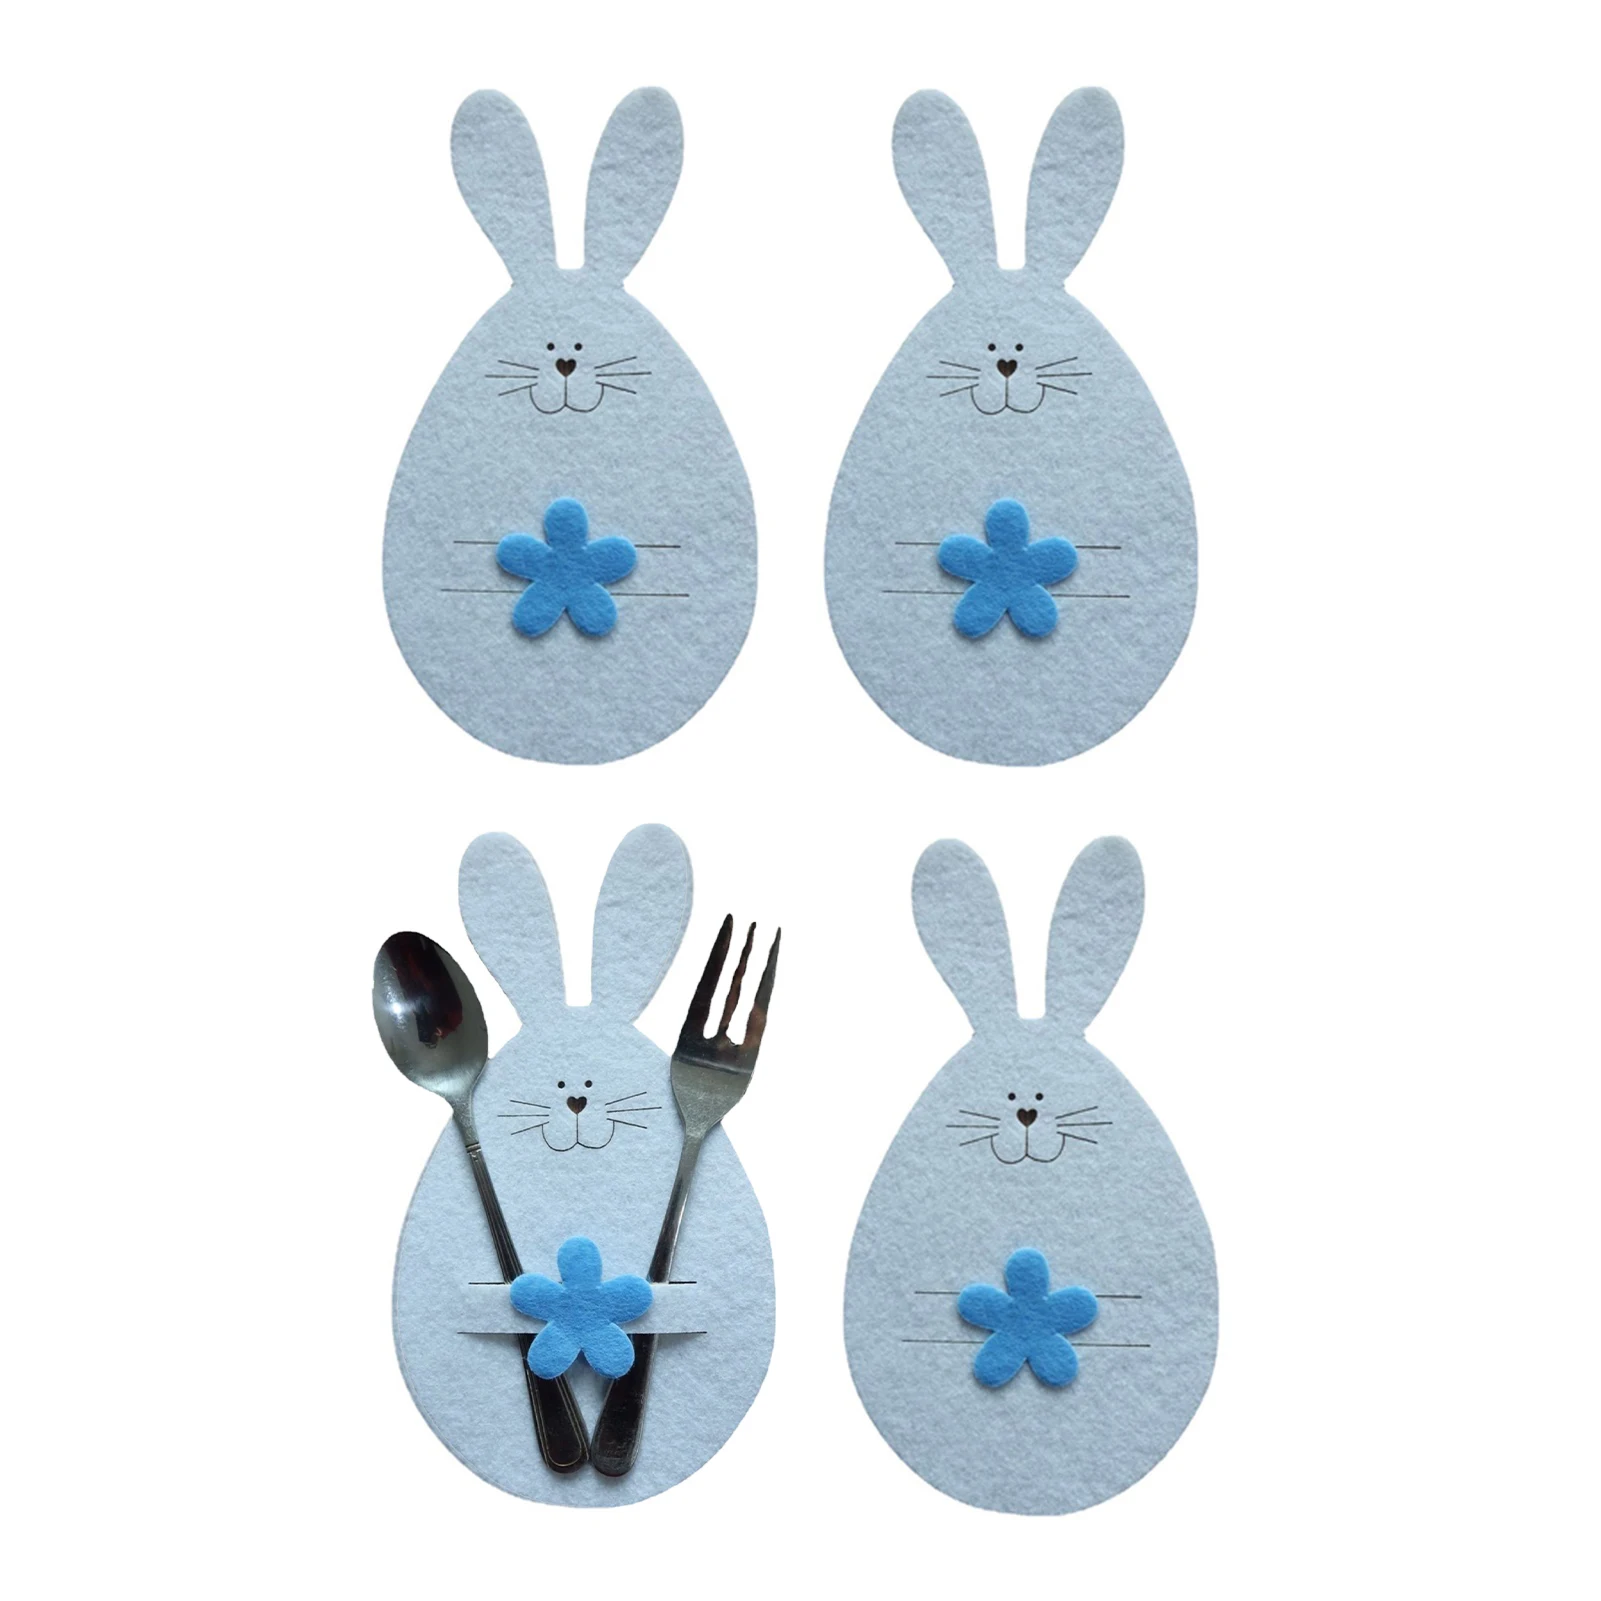 

Easter Cutlery Holder Set 4 PCS Utensil Cutlery Holders Pouch For Wedding Birthday Party Restaurant Reusable Silverware Bag For